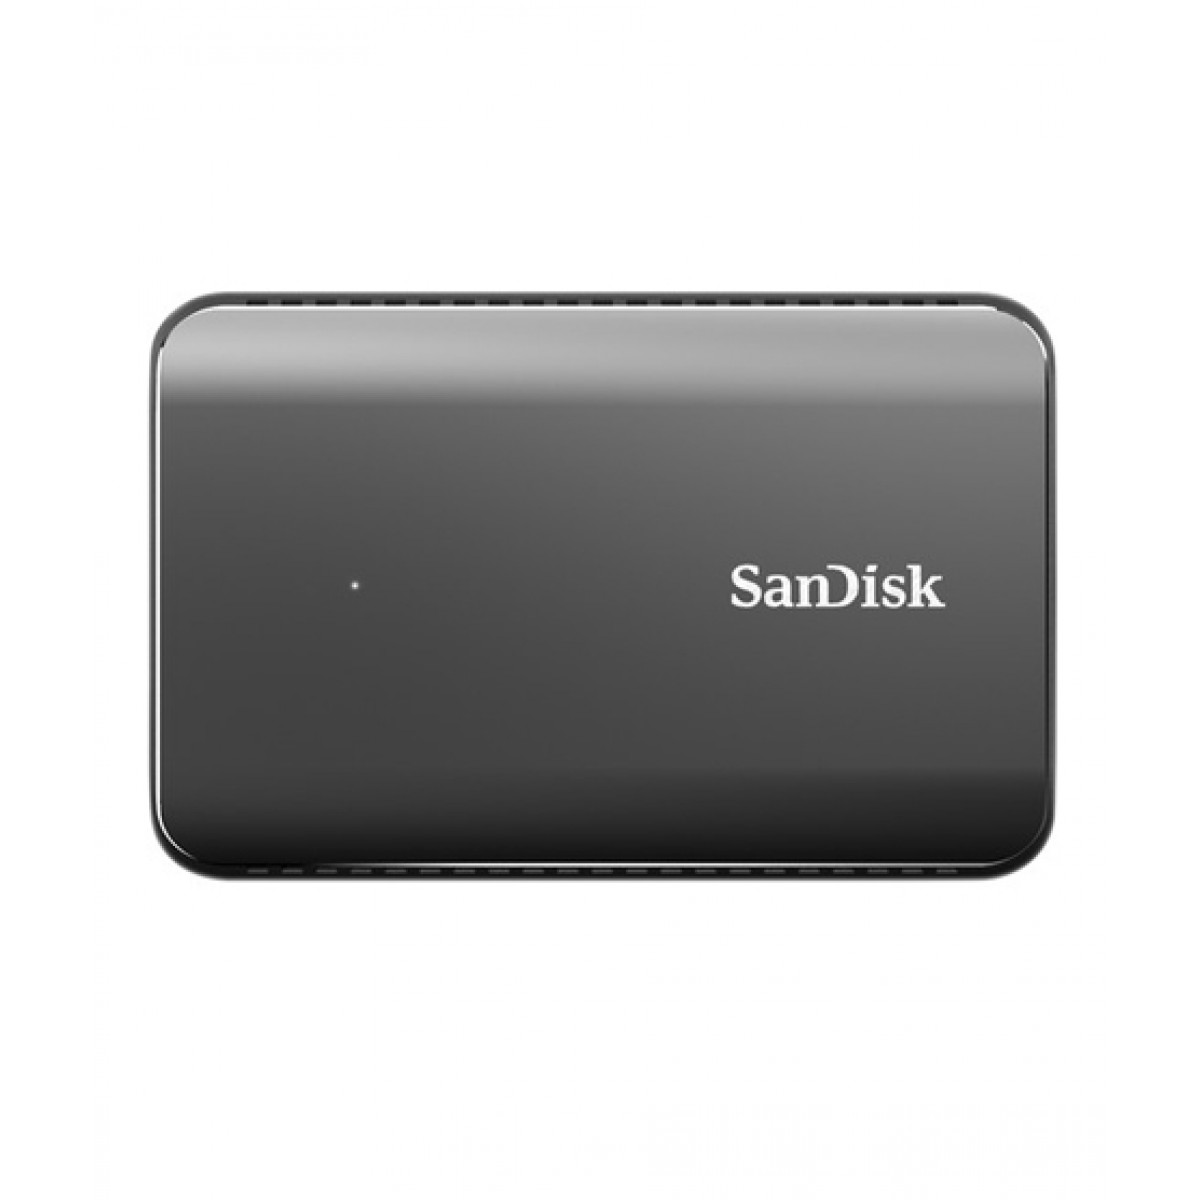 SanDisk Extreme 900 960GB Portable SSD